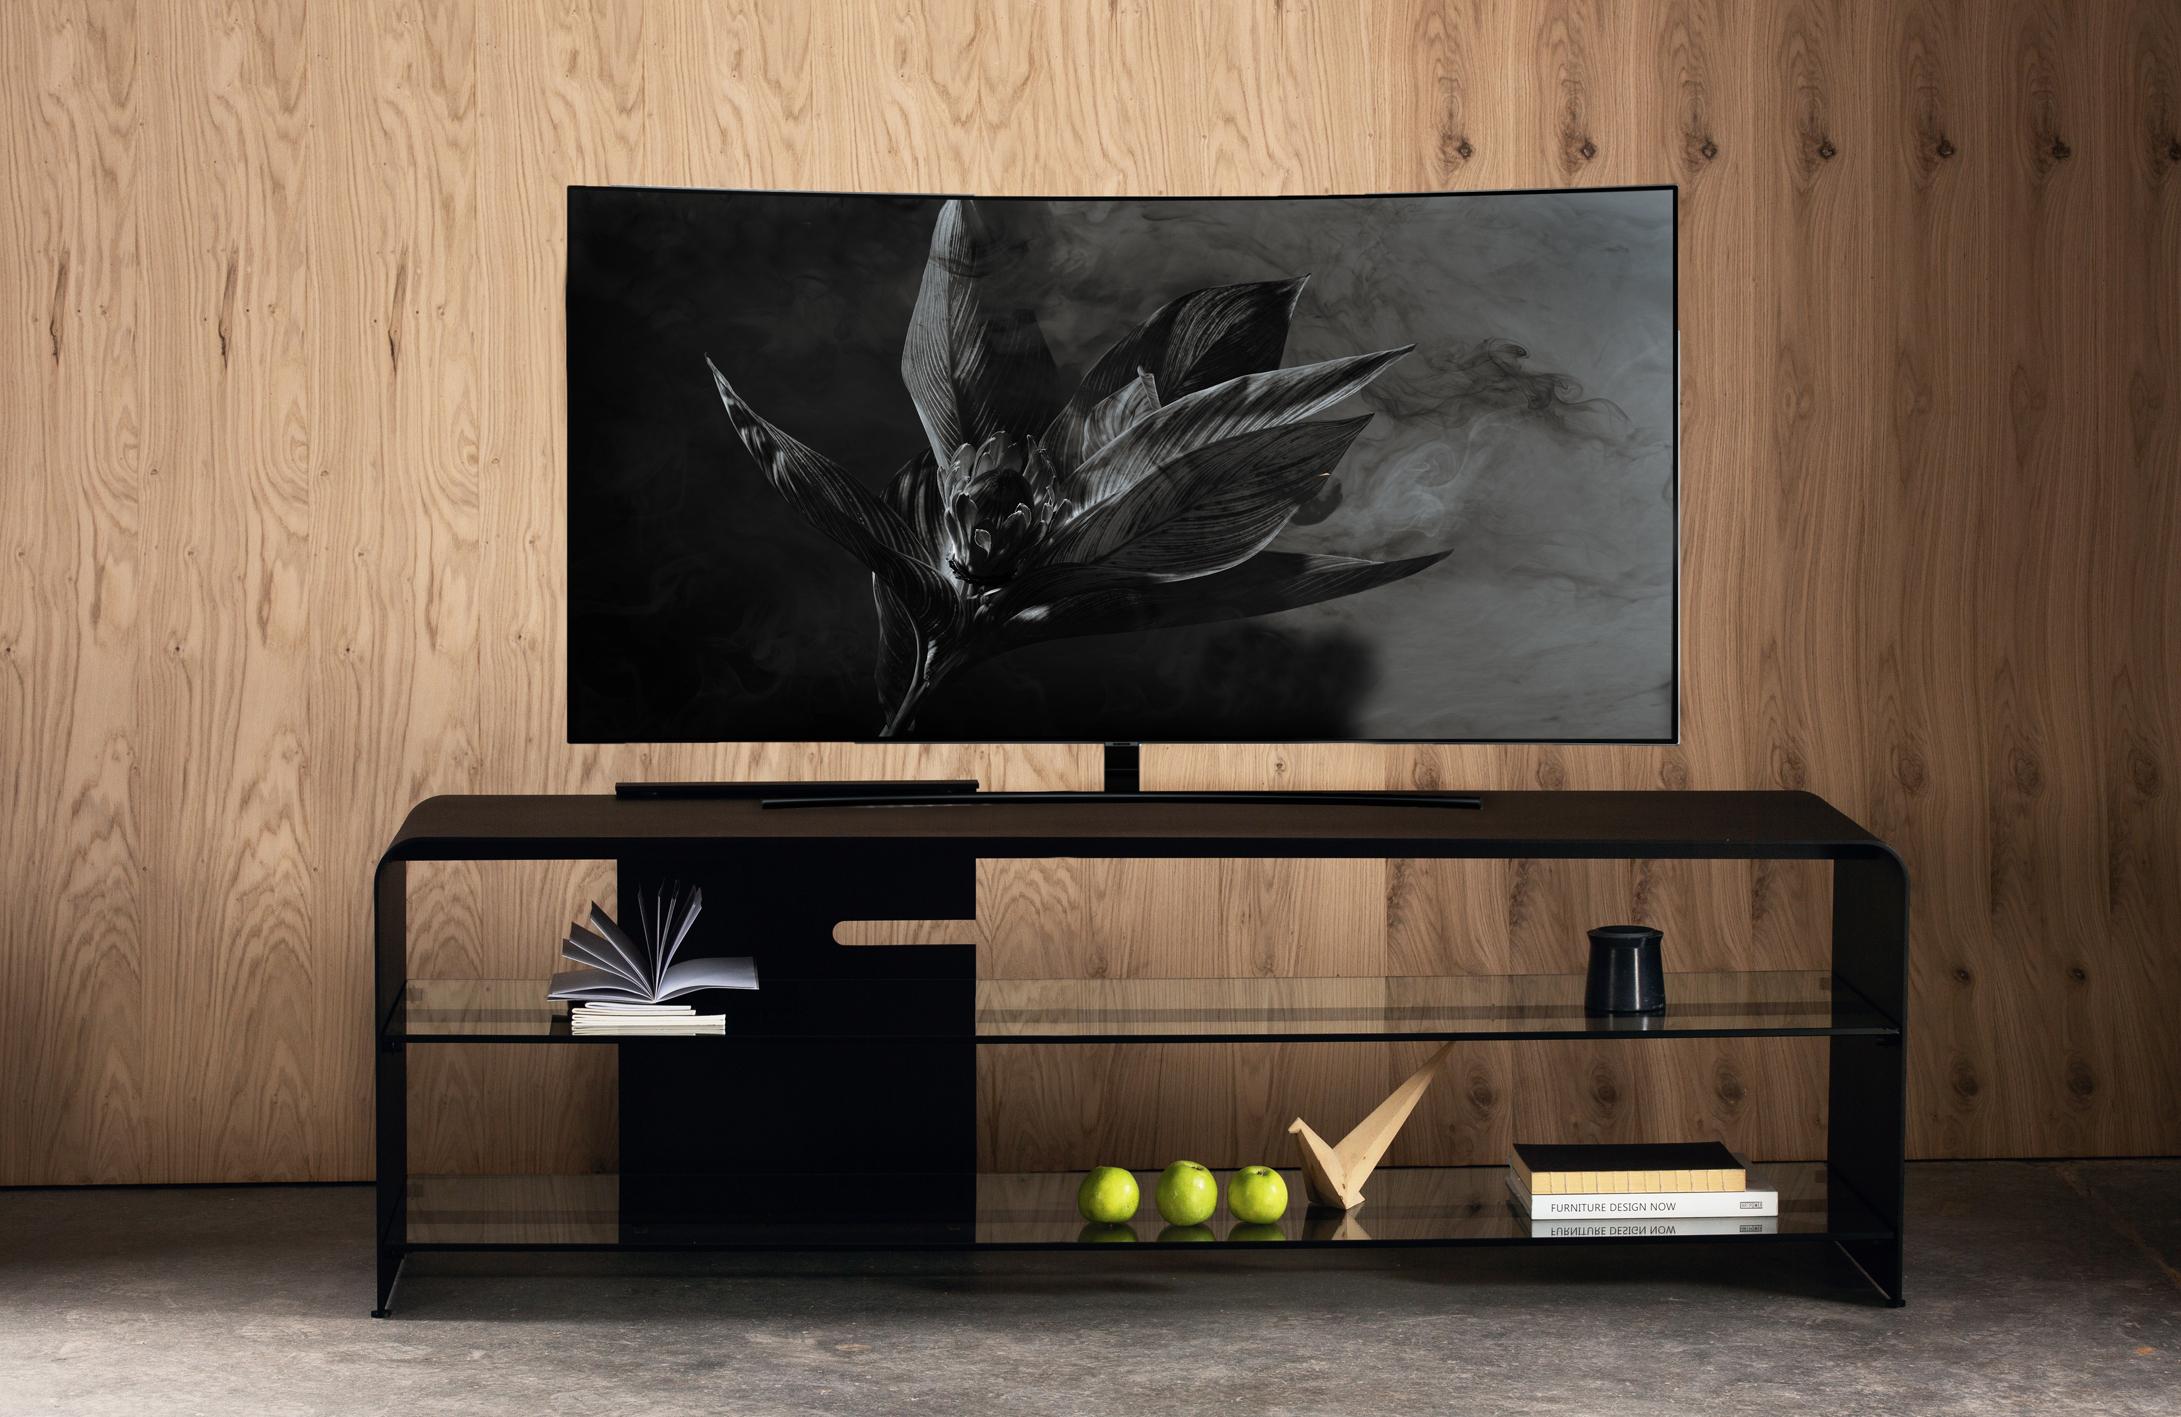 Space Up TV unit by Rectangle Studio
Dimensions: W 180 x D 45 x H 55 cm
Materials: Tempered glass, black powder over metal

SPACE UP TV Unit, based on void concept in home, office, hotel etc. reinterprets the areas of use with glass and metal